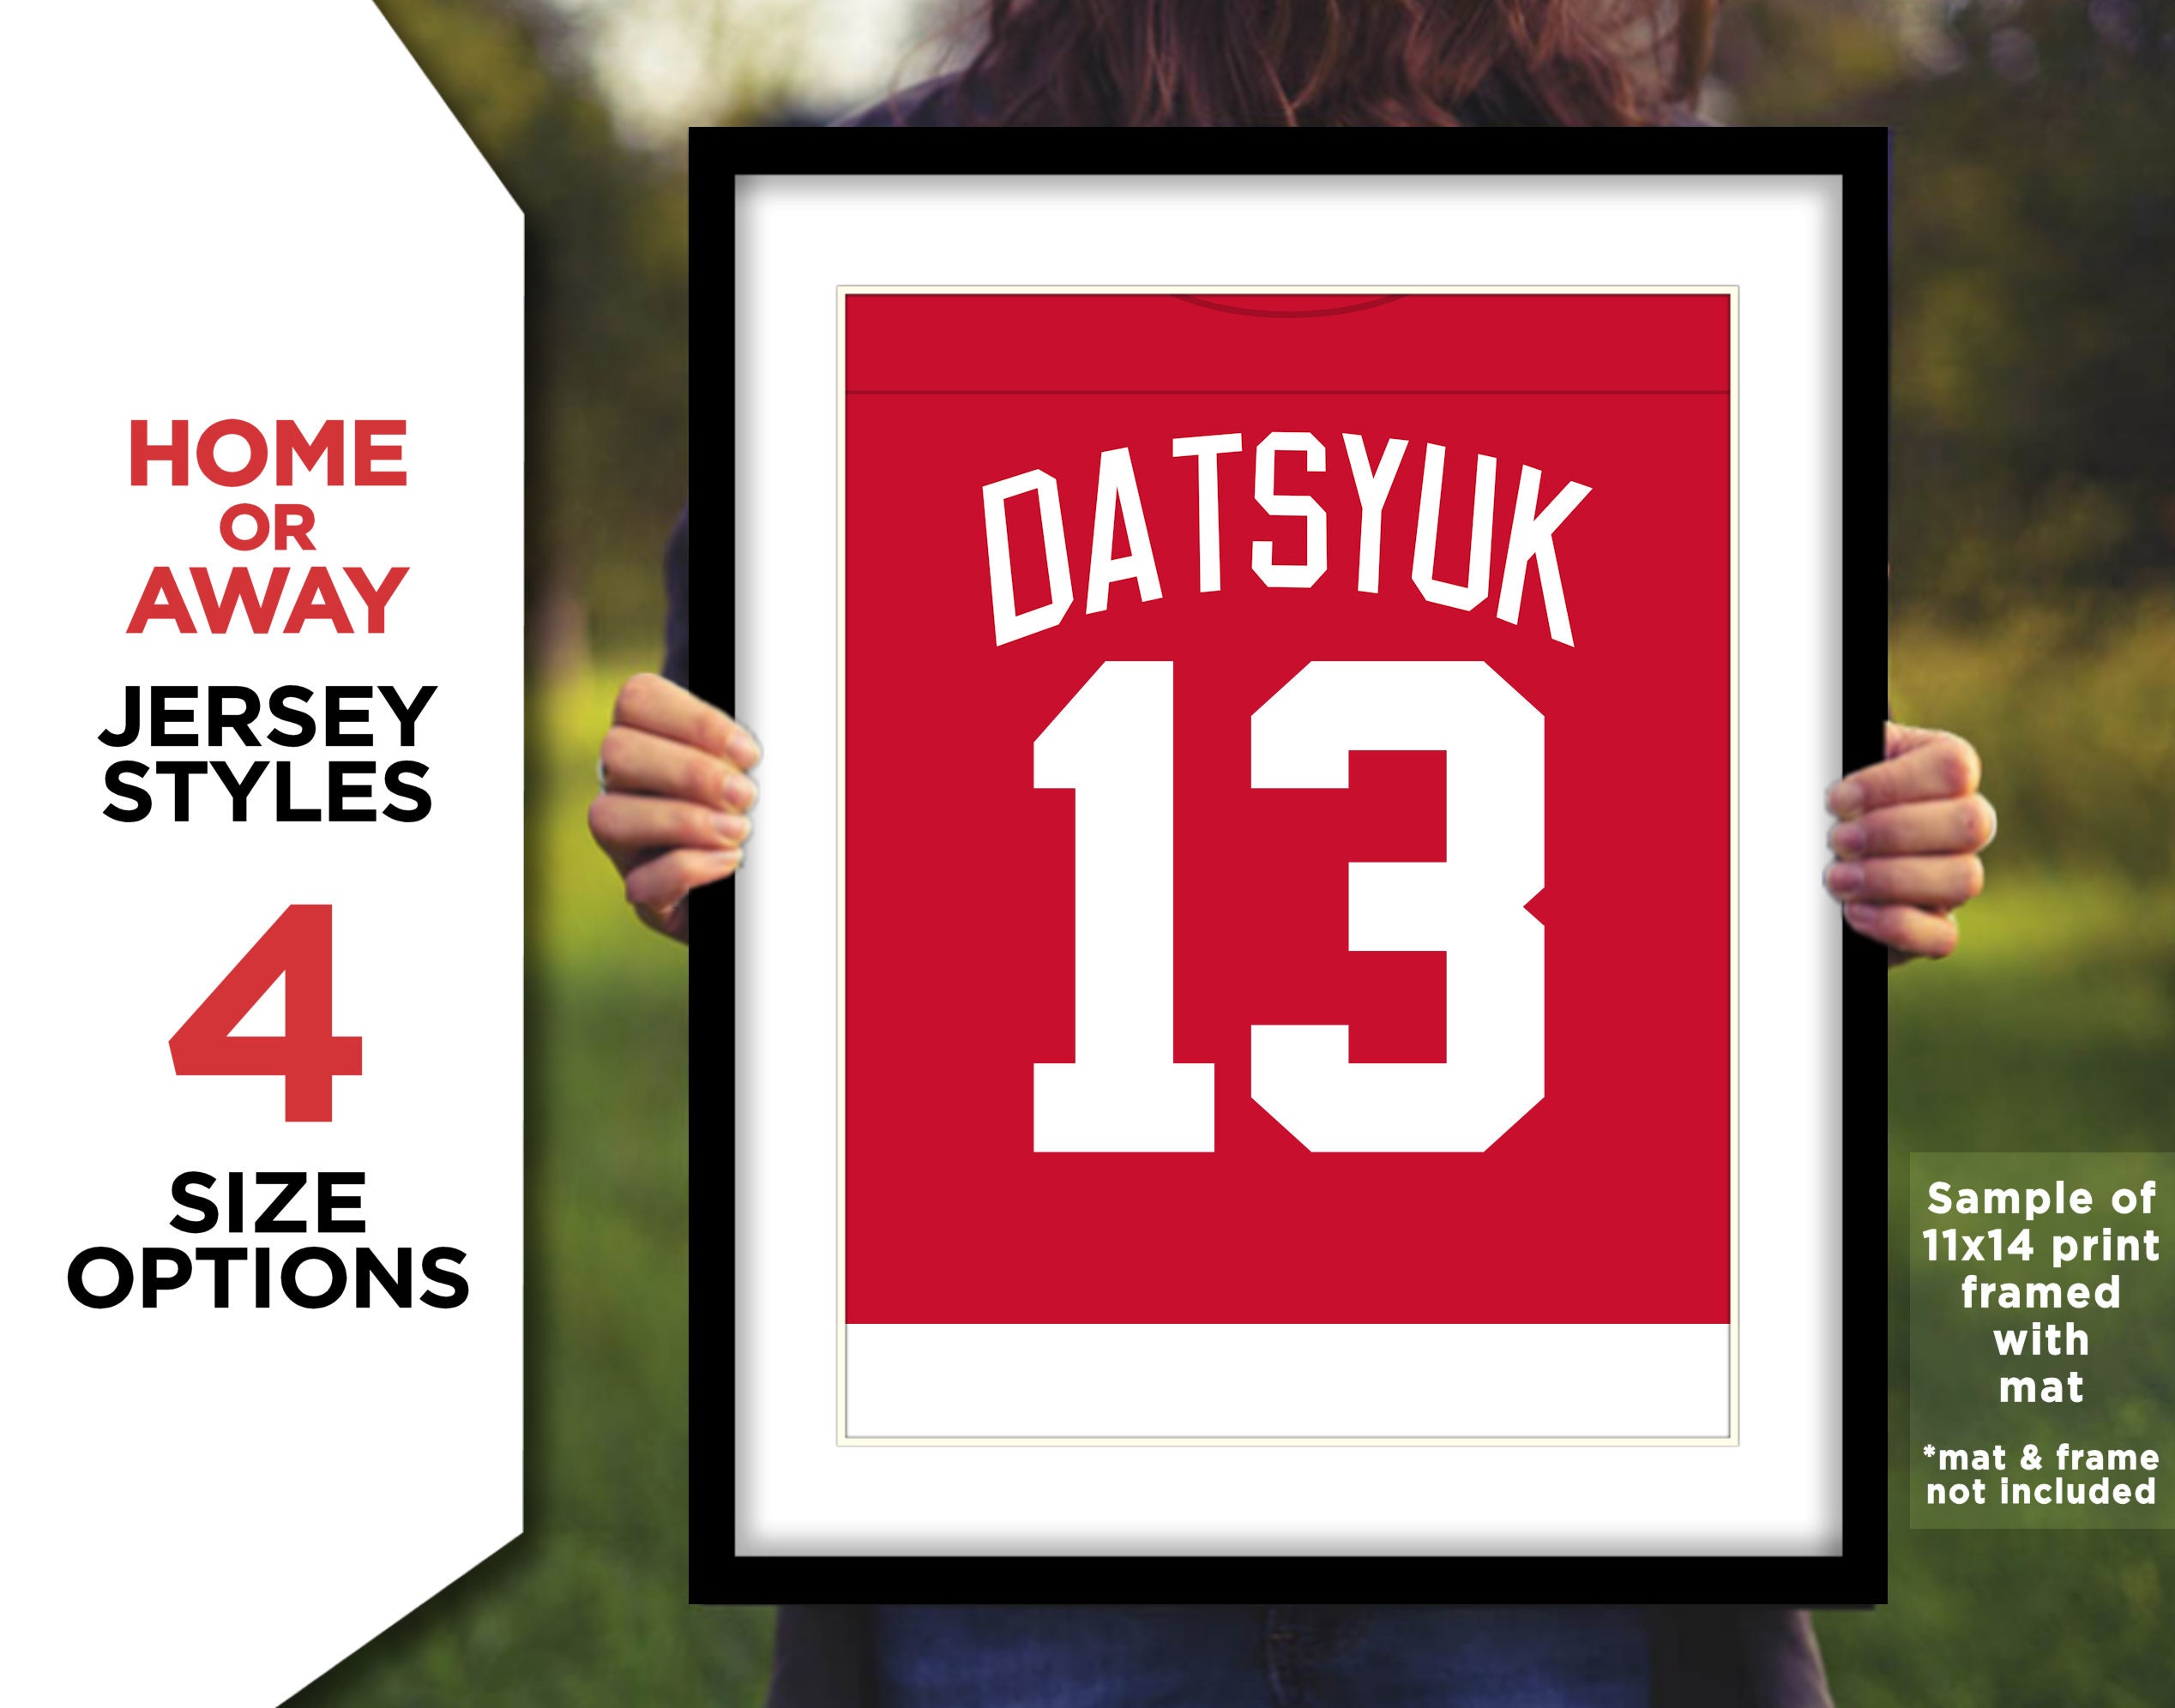 Pavel Datsyuk Autographed Detroit Red Wings Red Jersey W/PROOF